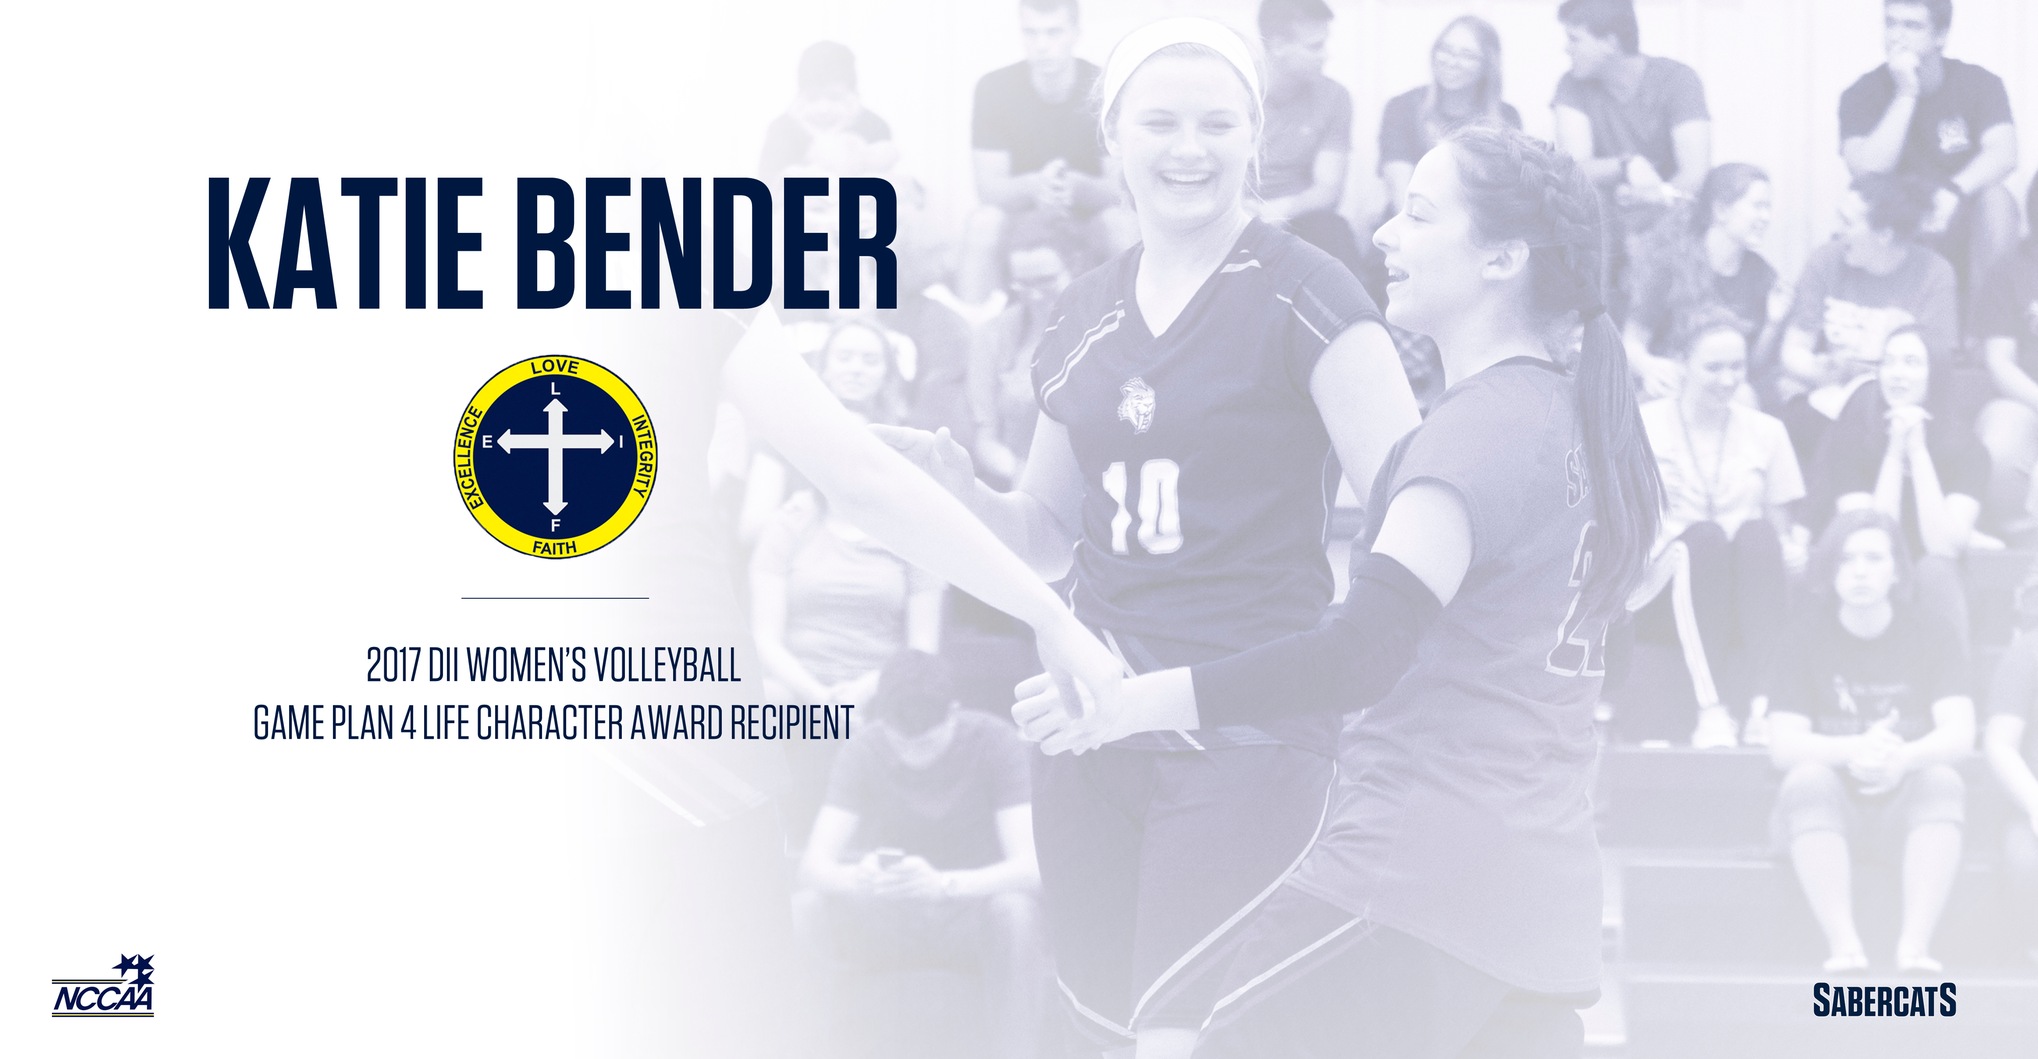 Katie Bender Named 2017 DII Women's Volleyball GP4L Character Award Recipient